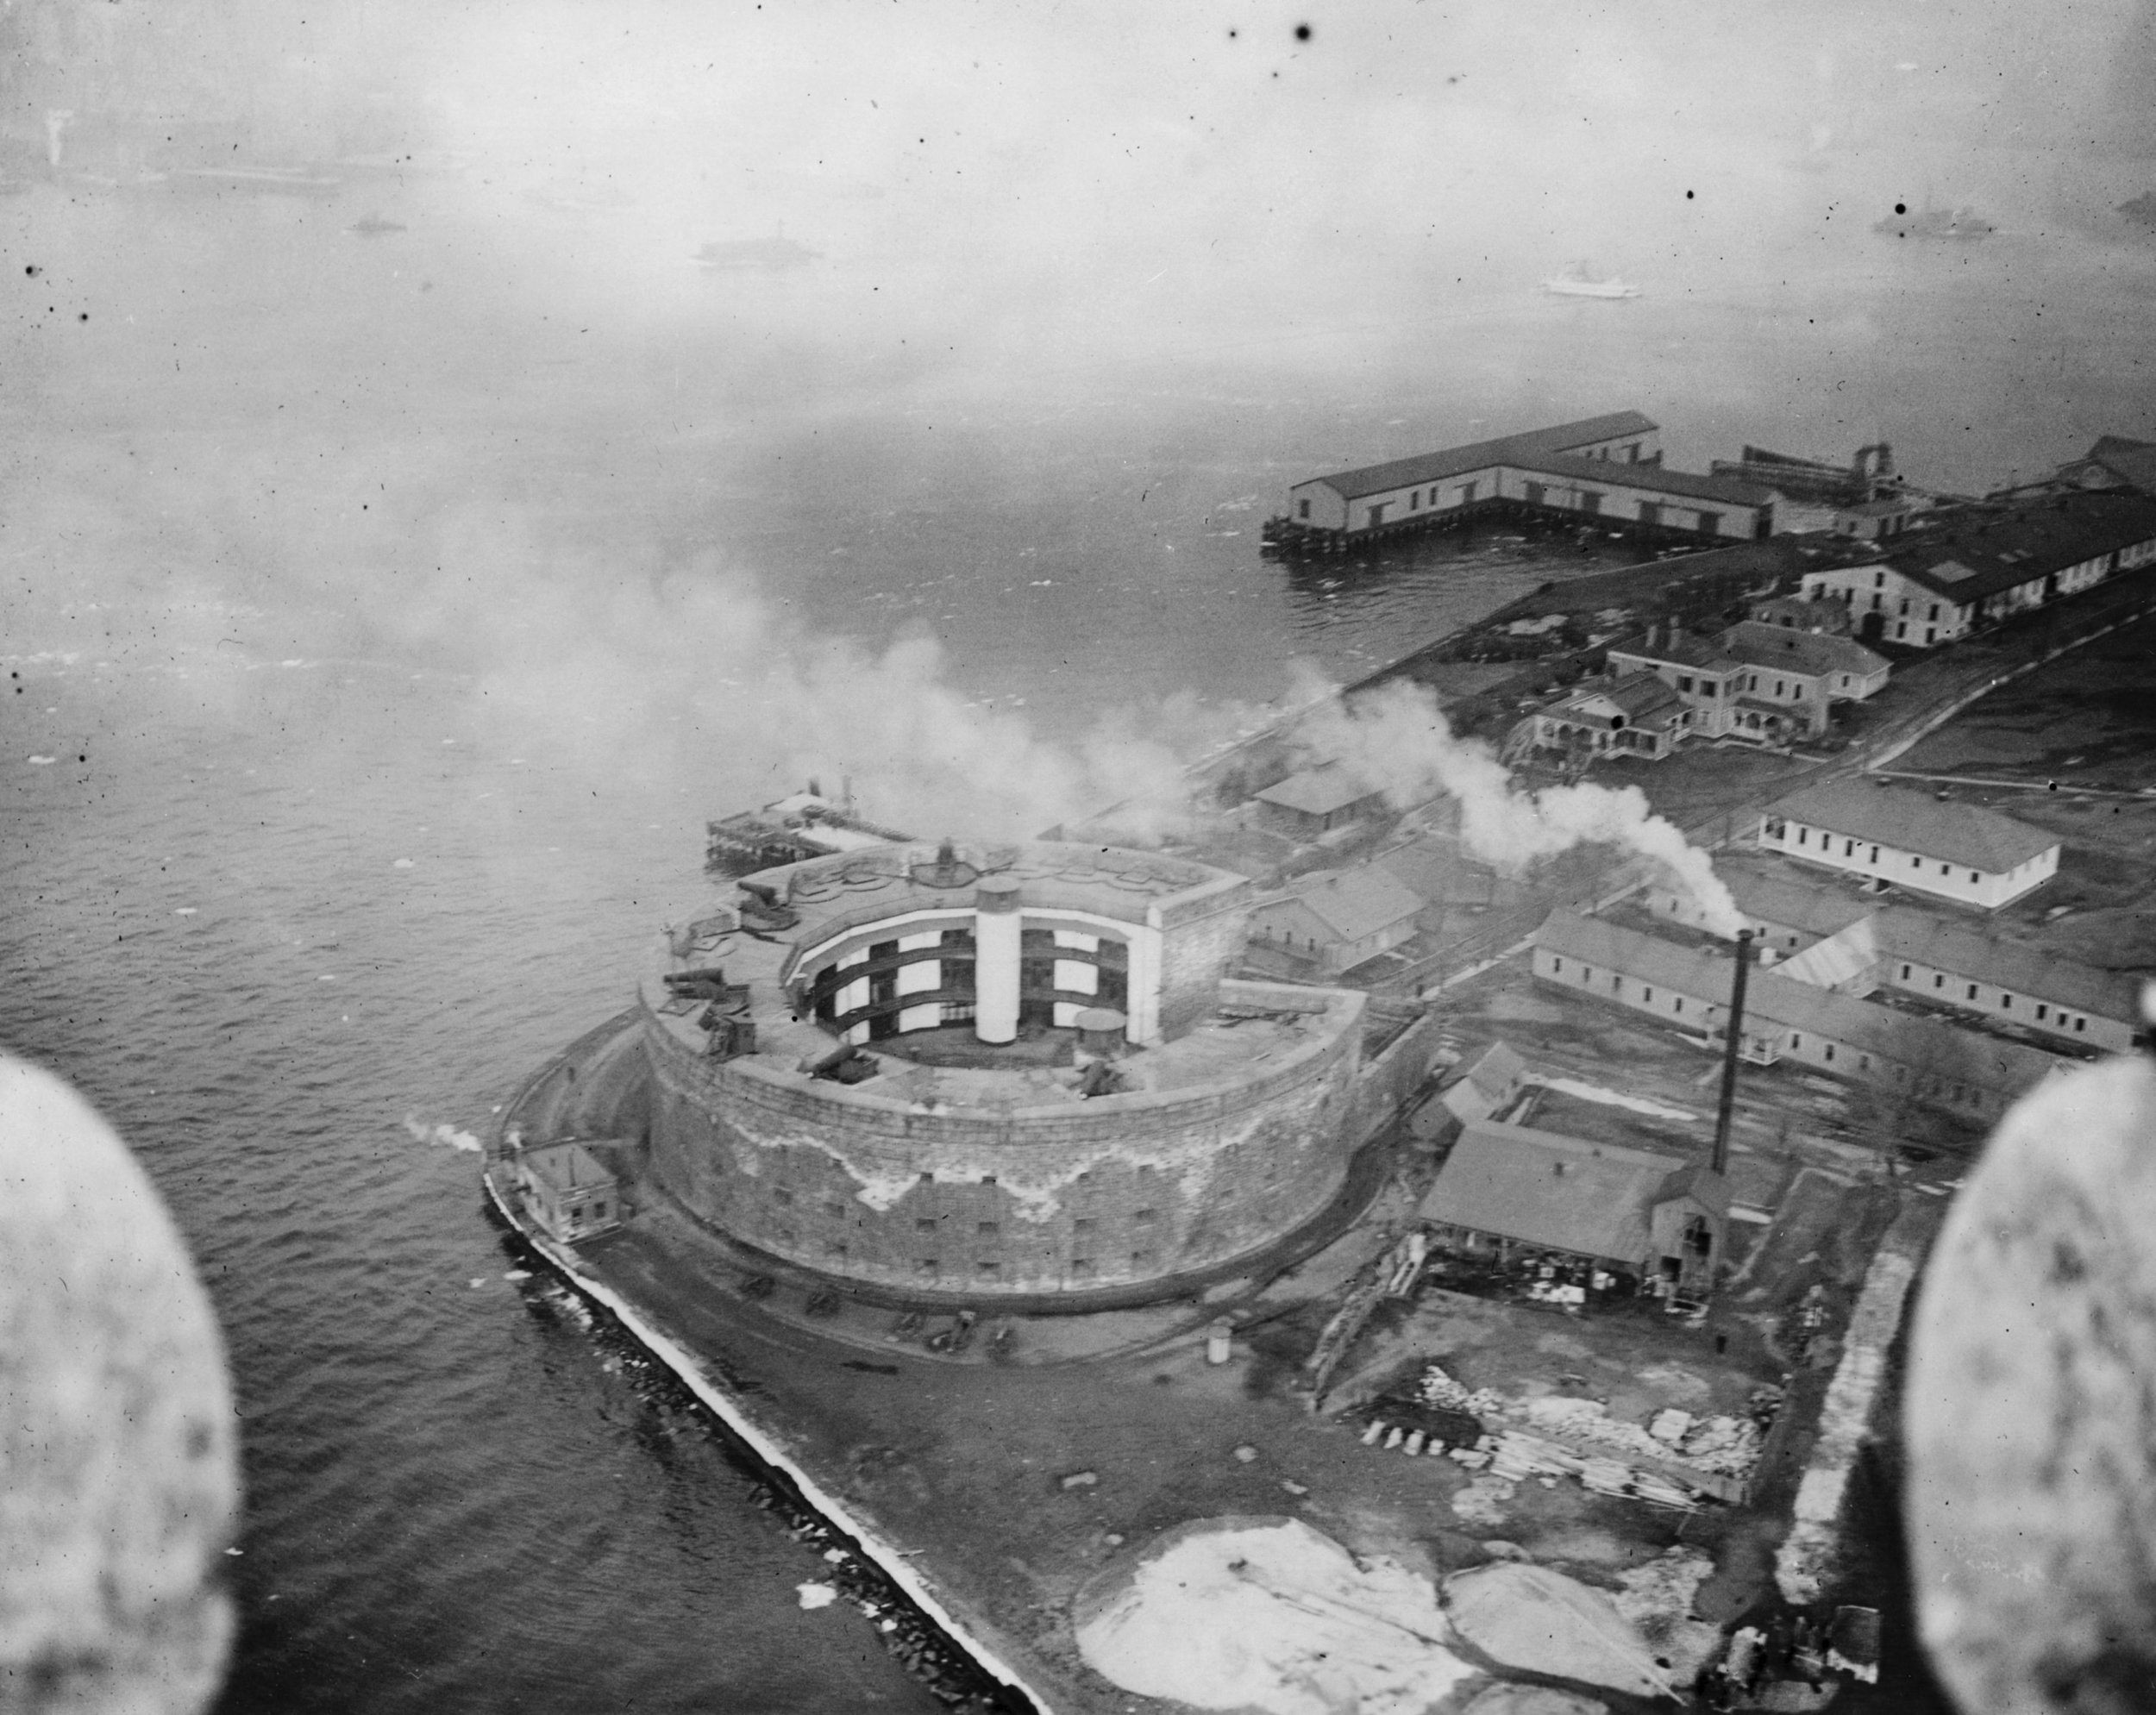 Castle_Williams_from_the_air,_Governor's_Island,_1912.jpg